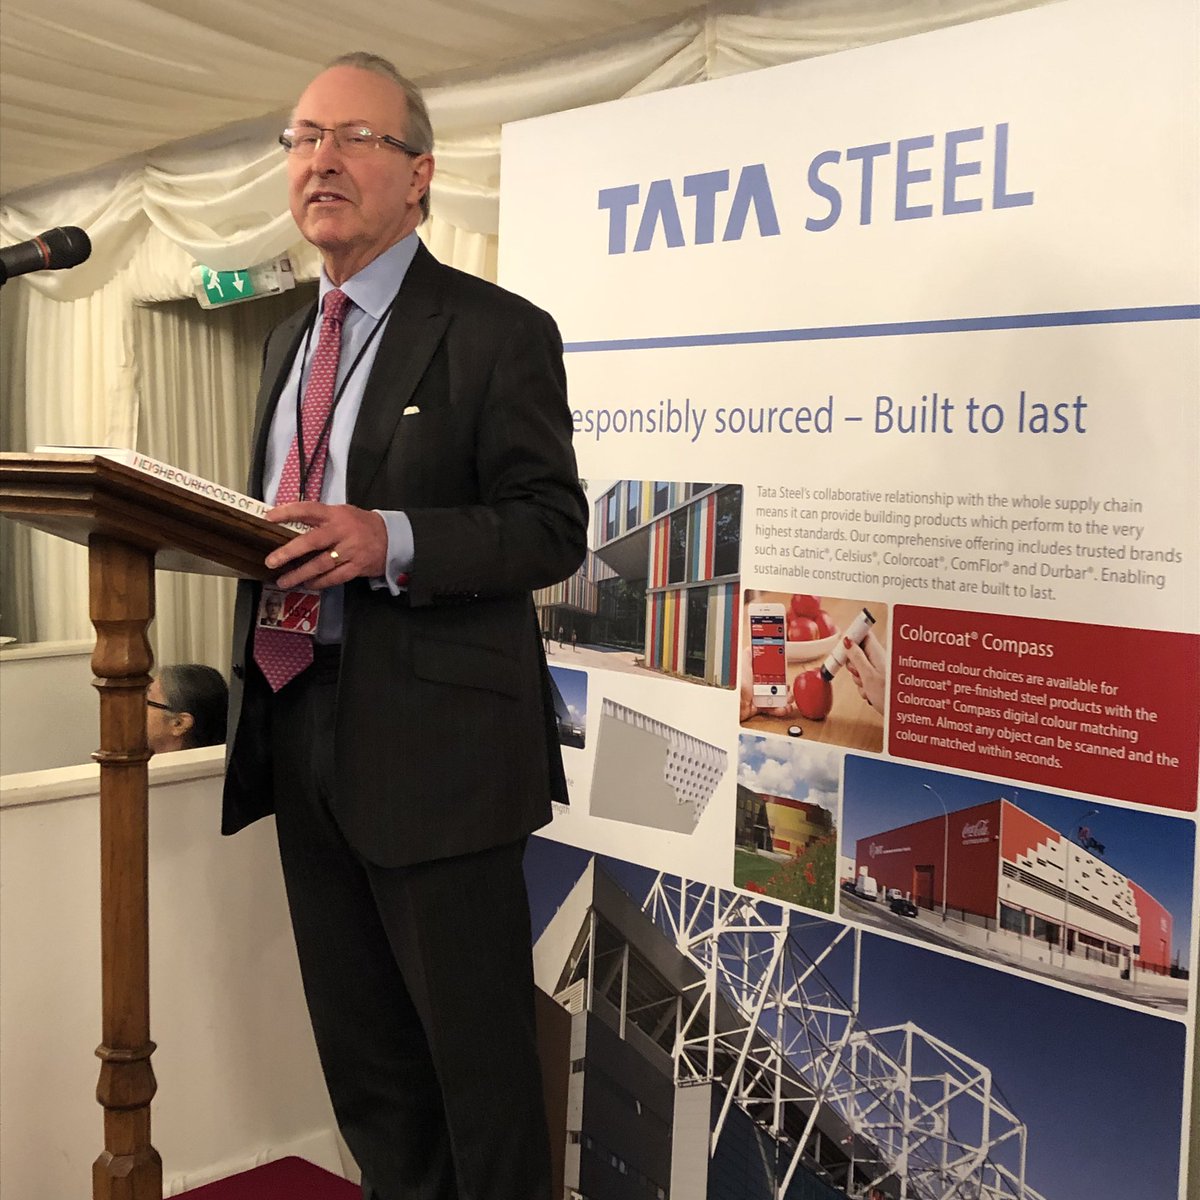 Many thanks to Lord Best for a wonderful reception today for the launch of Neighbourhoods of the Future @TataSteelConstr @TataSteelEurope @agileageing #steelmatters #Construction